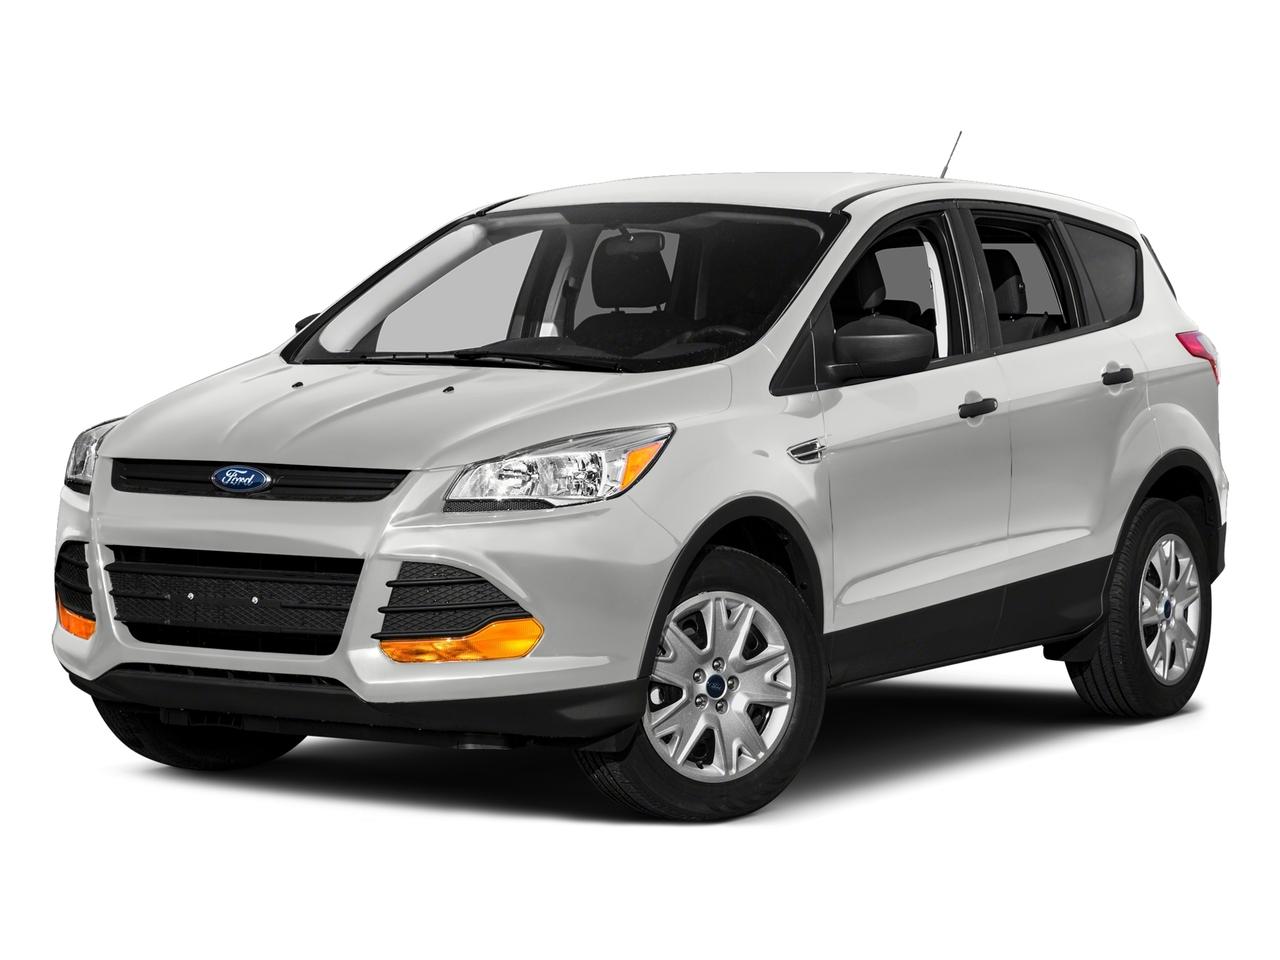 2016 Ford Escape Vehicle Photo in Plainfield, IL 60586